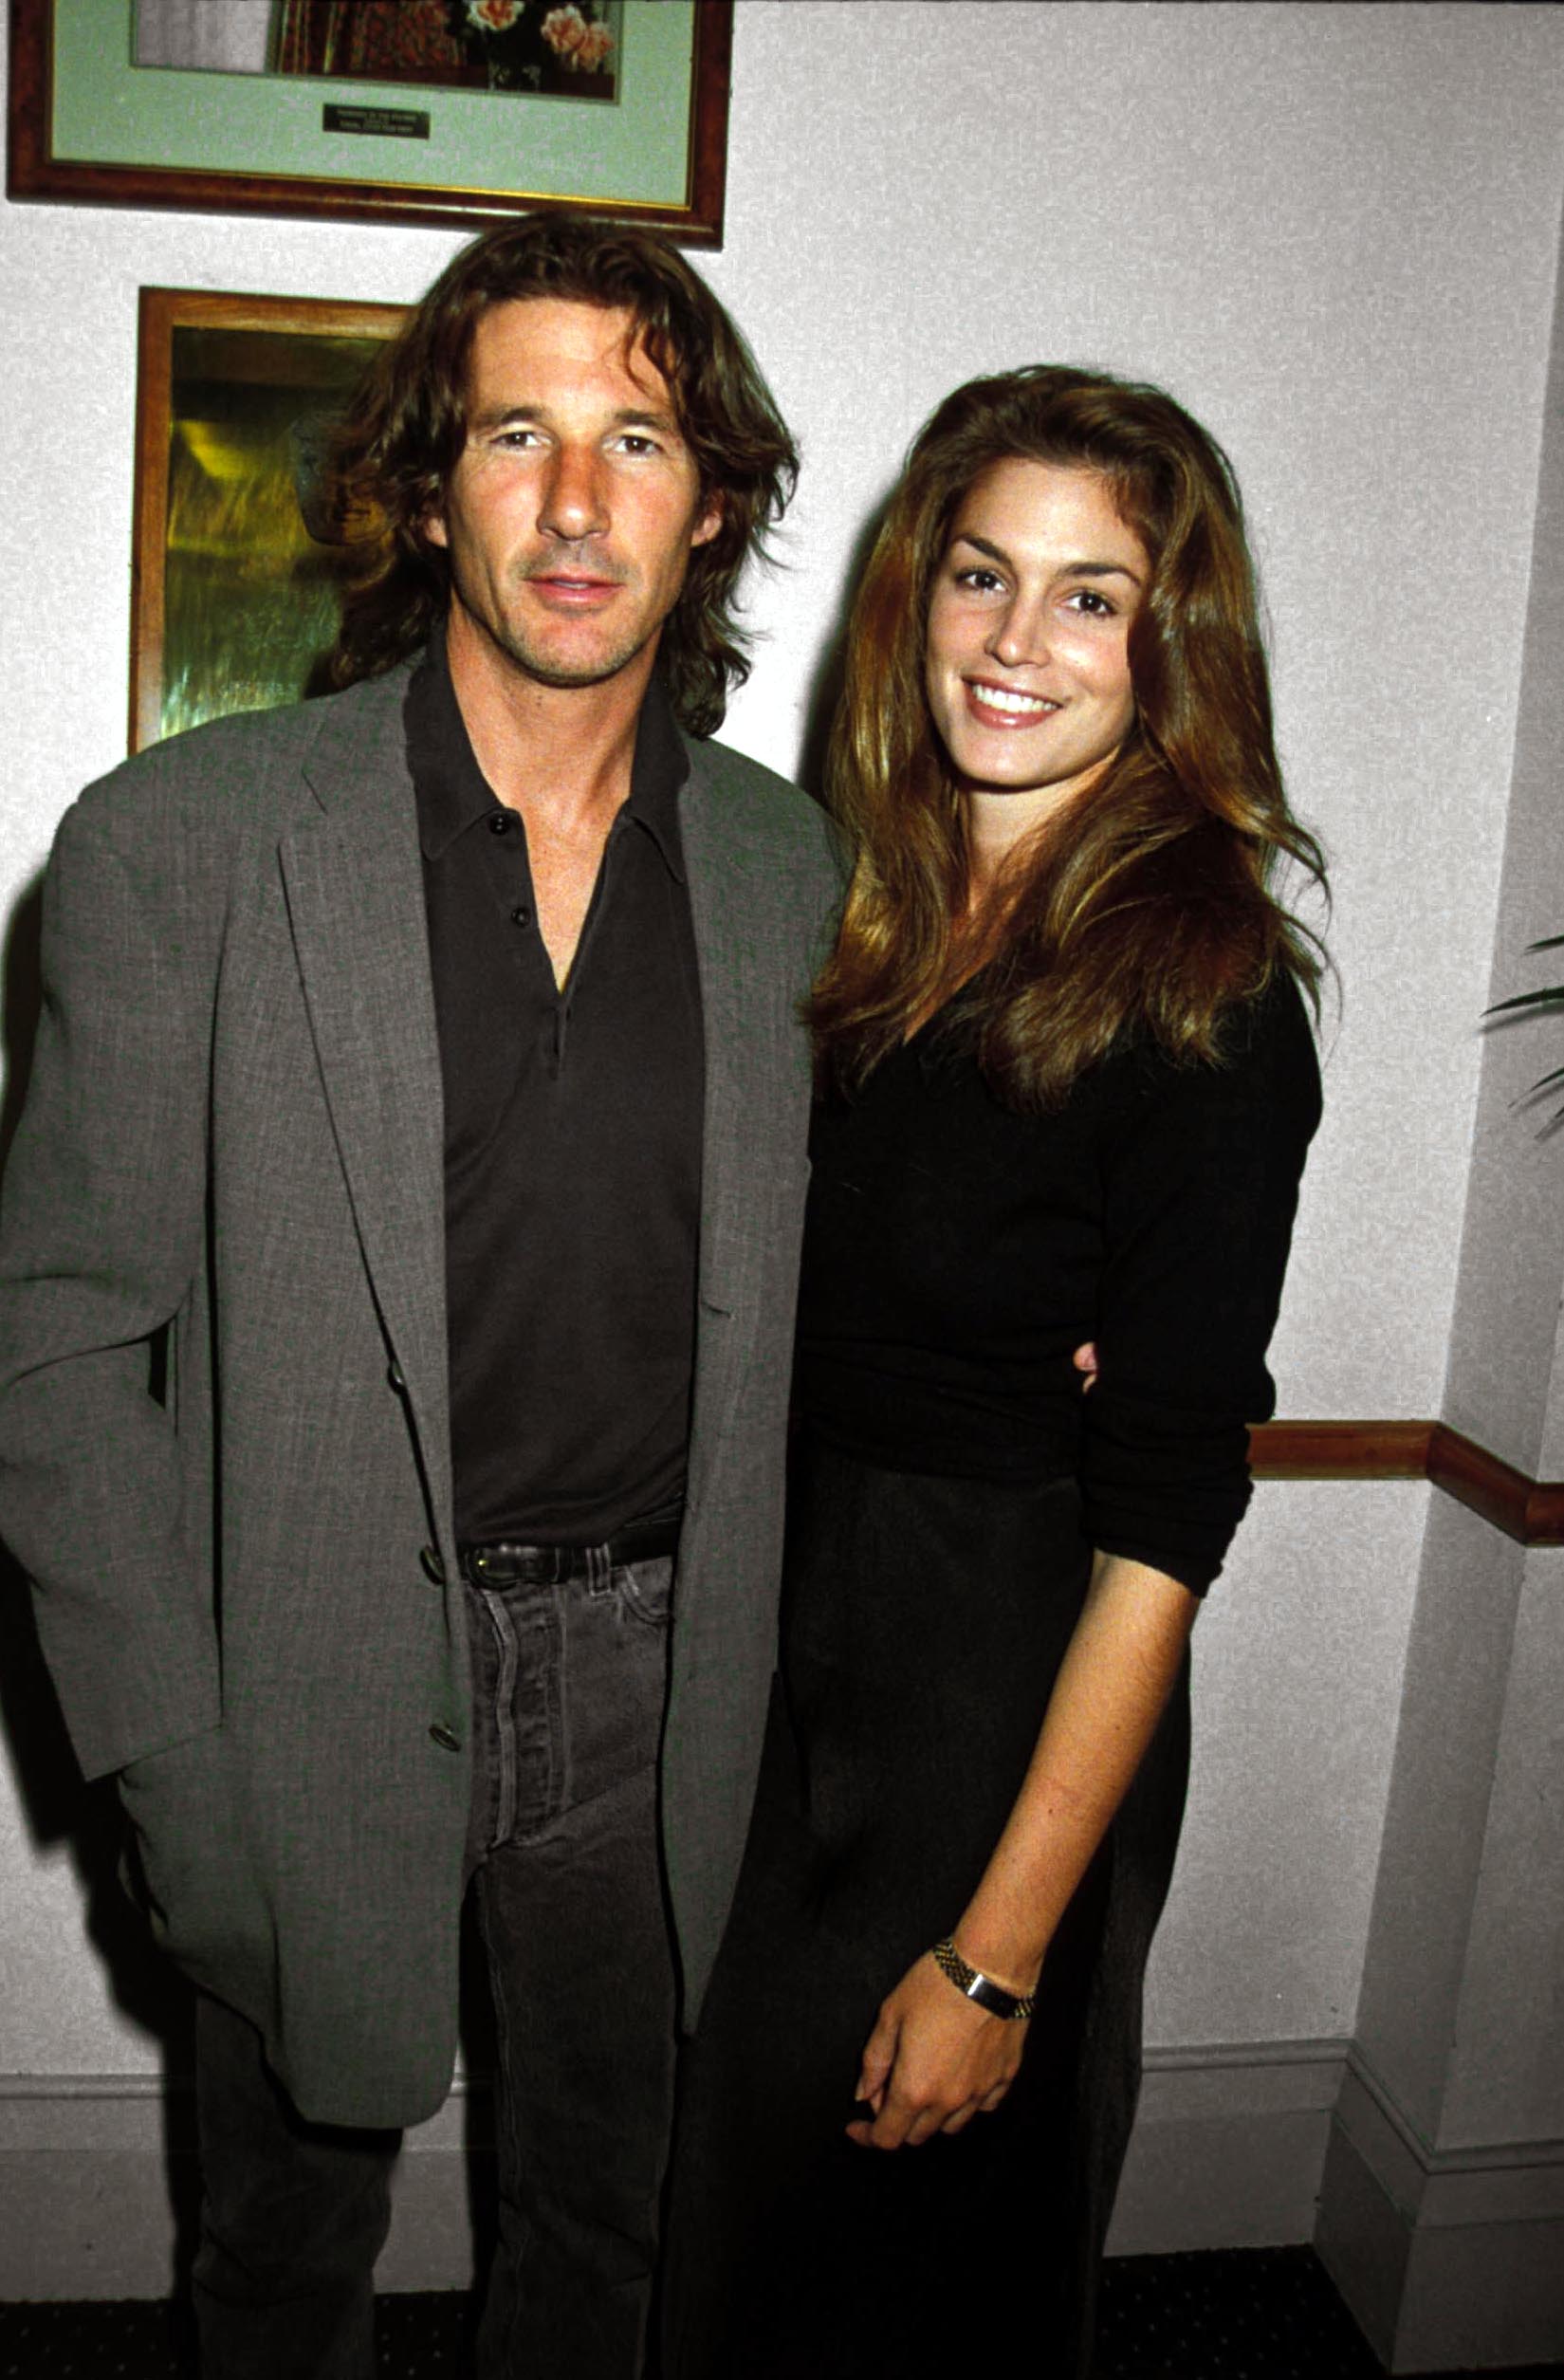 Cindy Crawford And Richard Gere attend the "Mr Jones" premiere circa 1991. | Source: Getty Images.